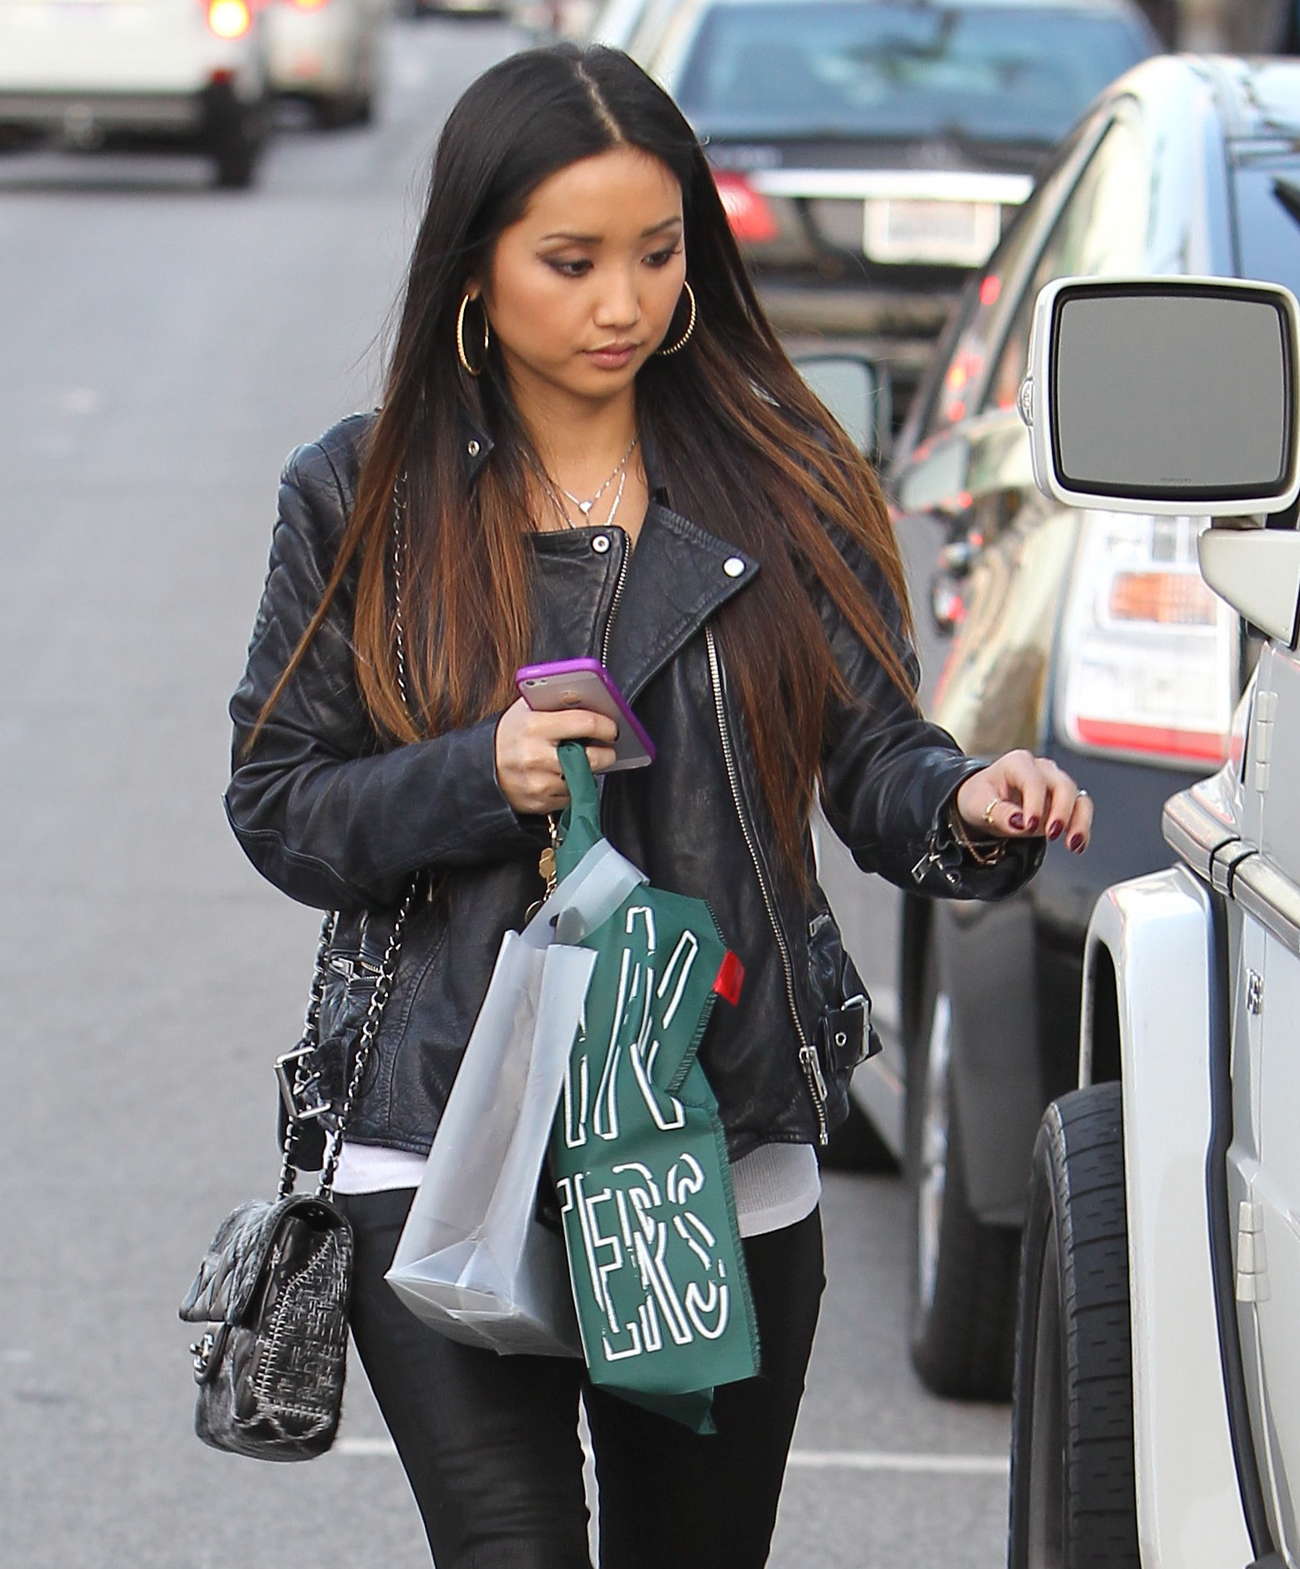 Brenda Song - Wearing Leather Pants out in Los Angeles